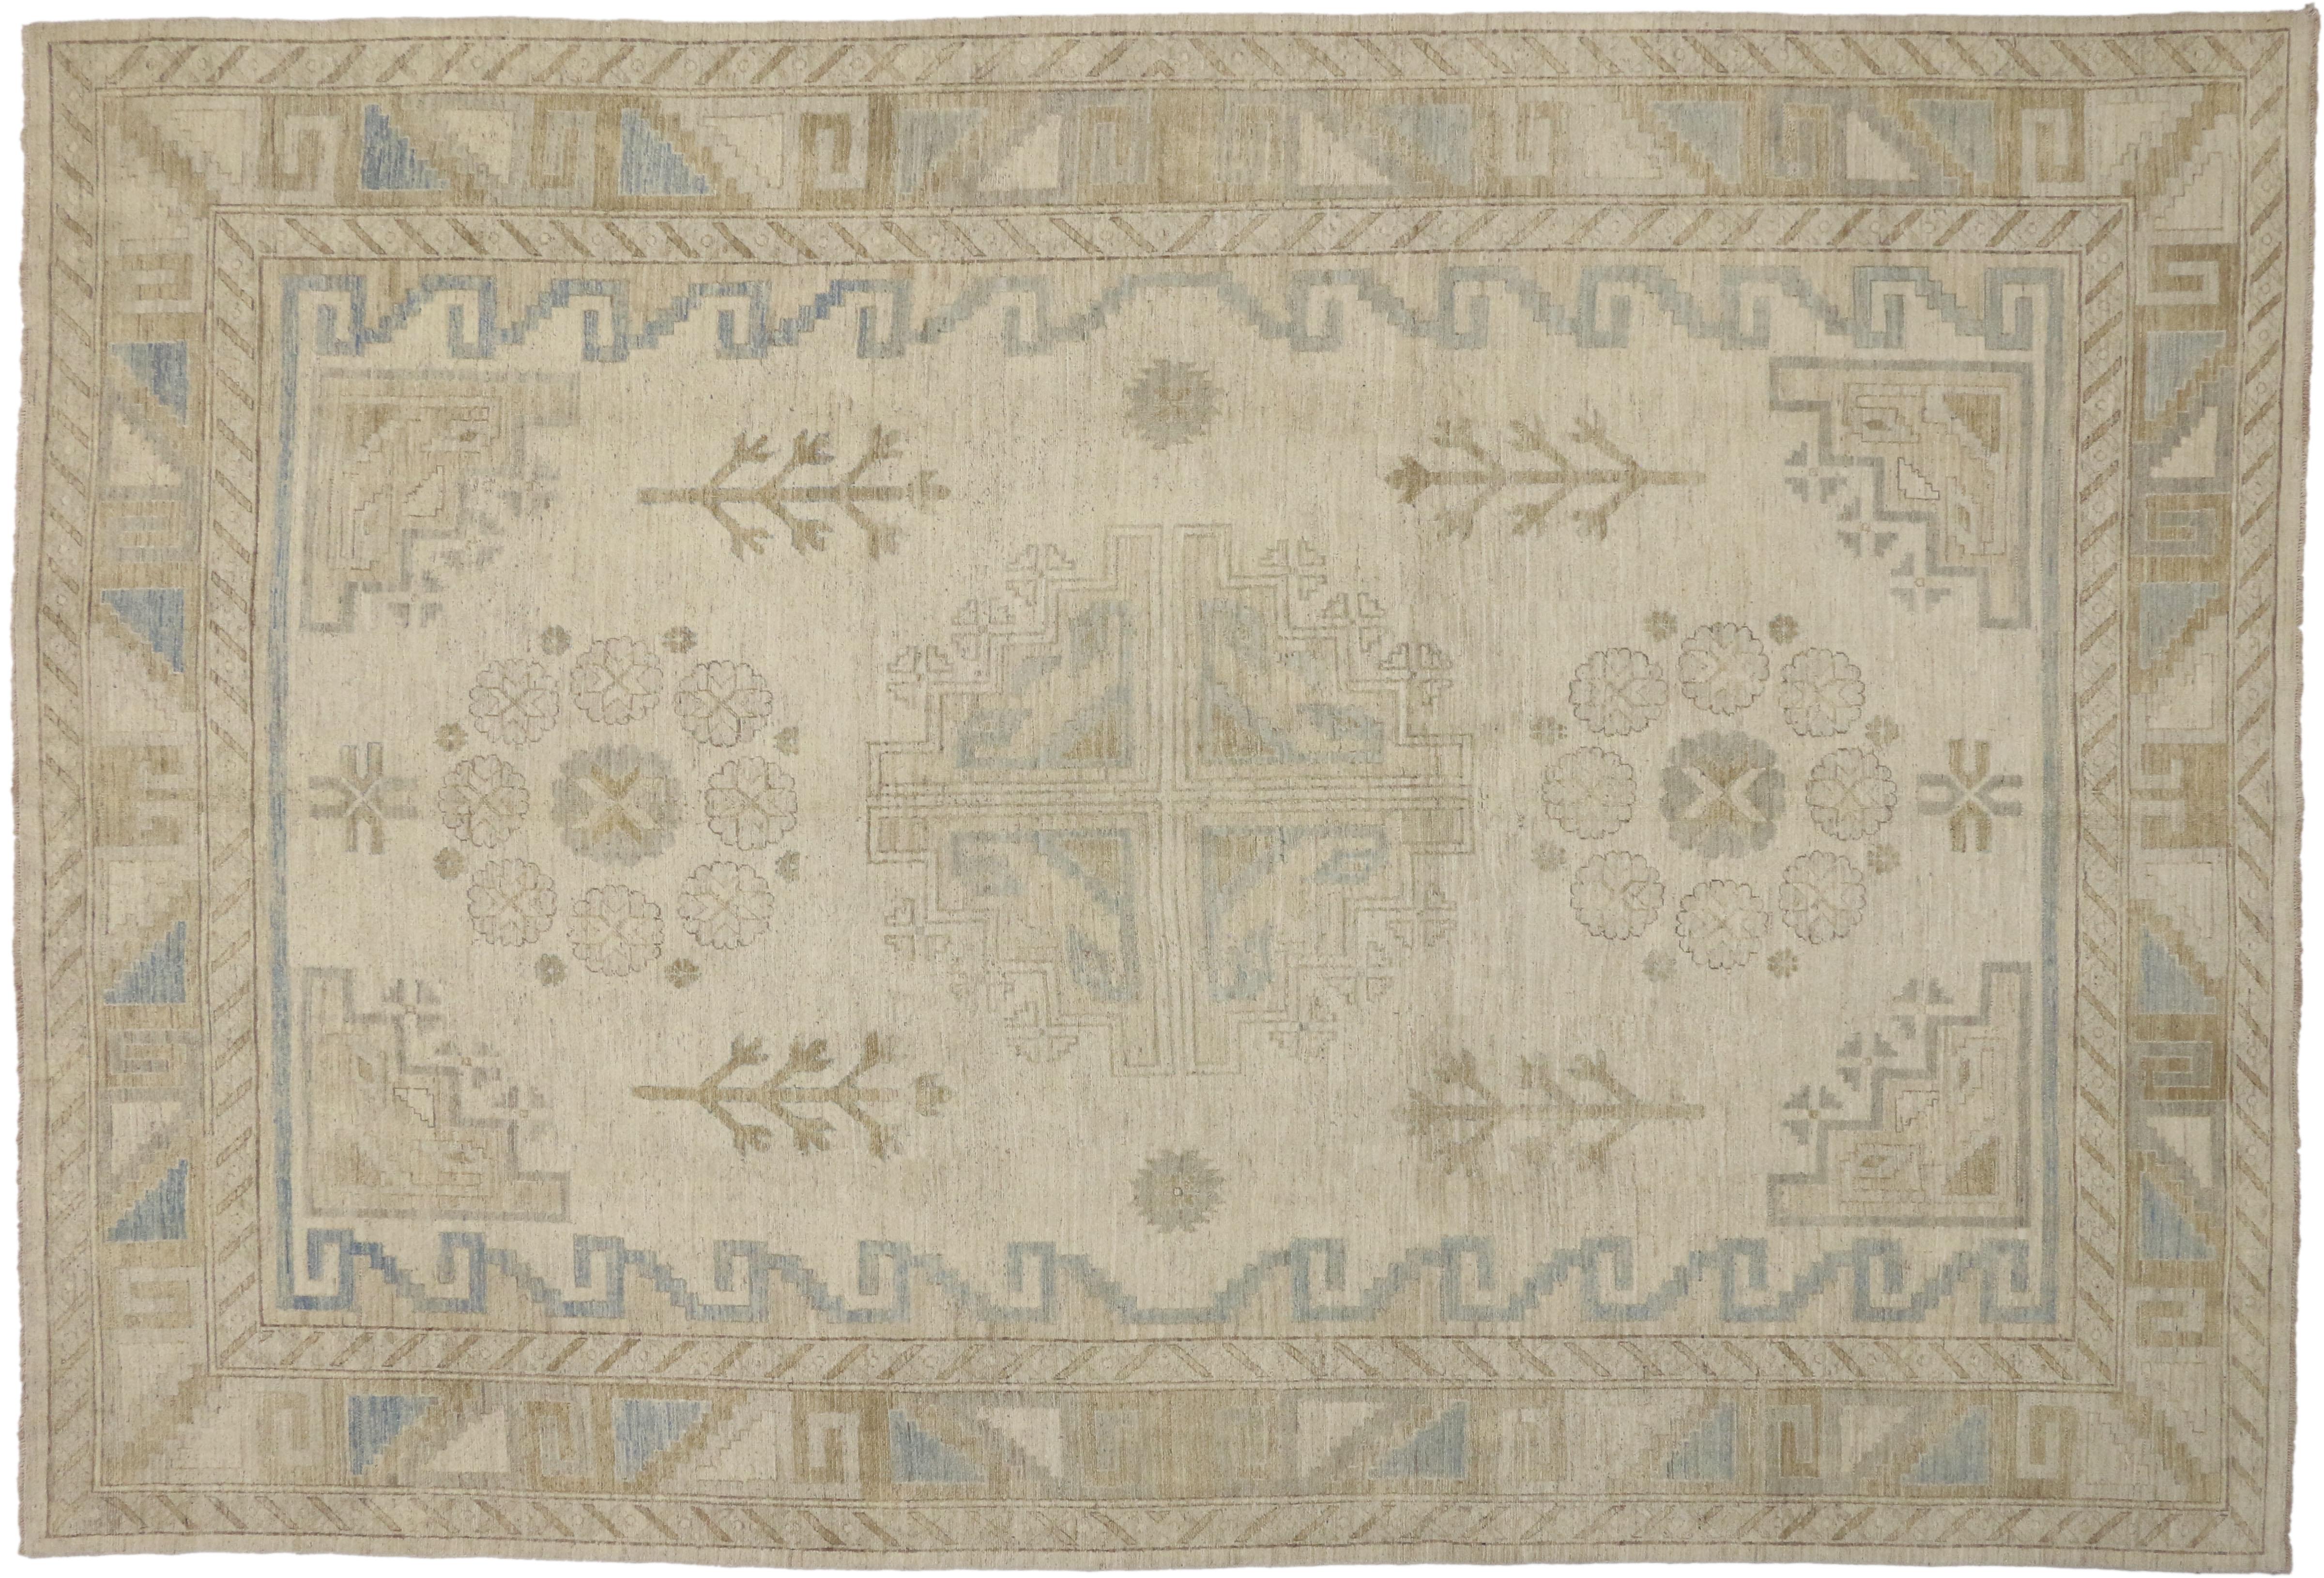 80185 New Transitional Area Rug with Khotan Design in Warm, Neutral Colors. This hand-knotted wool transitional area rug features a Khotan design with a traditional prominent medallion design like most carpets from East Turkestan and Khotan.